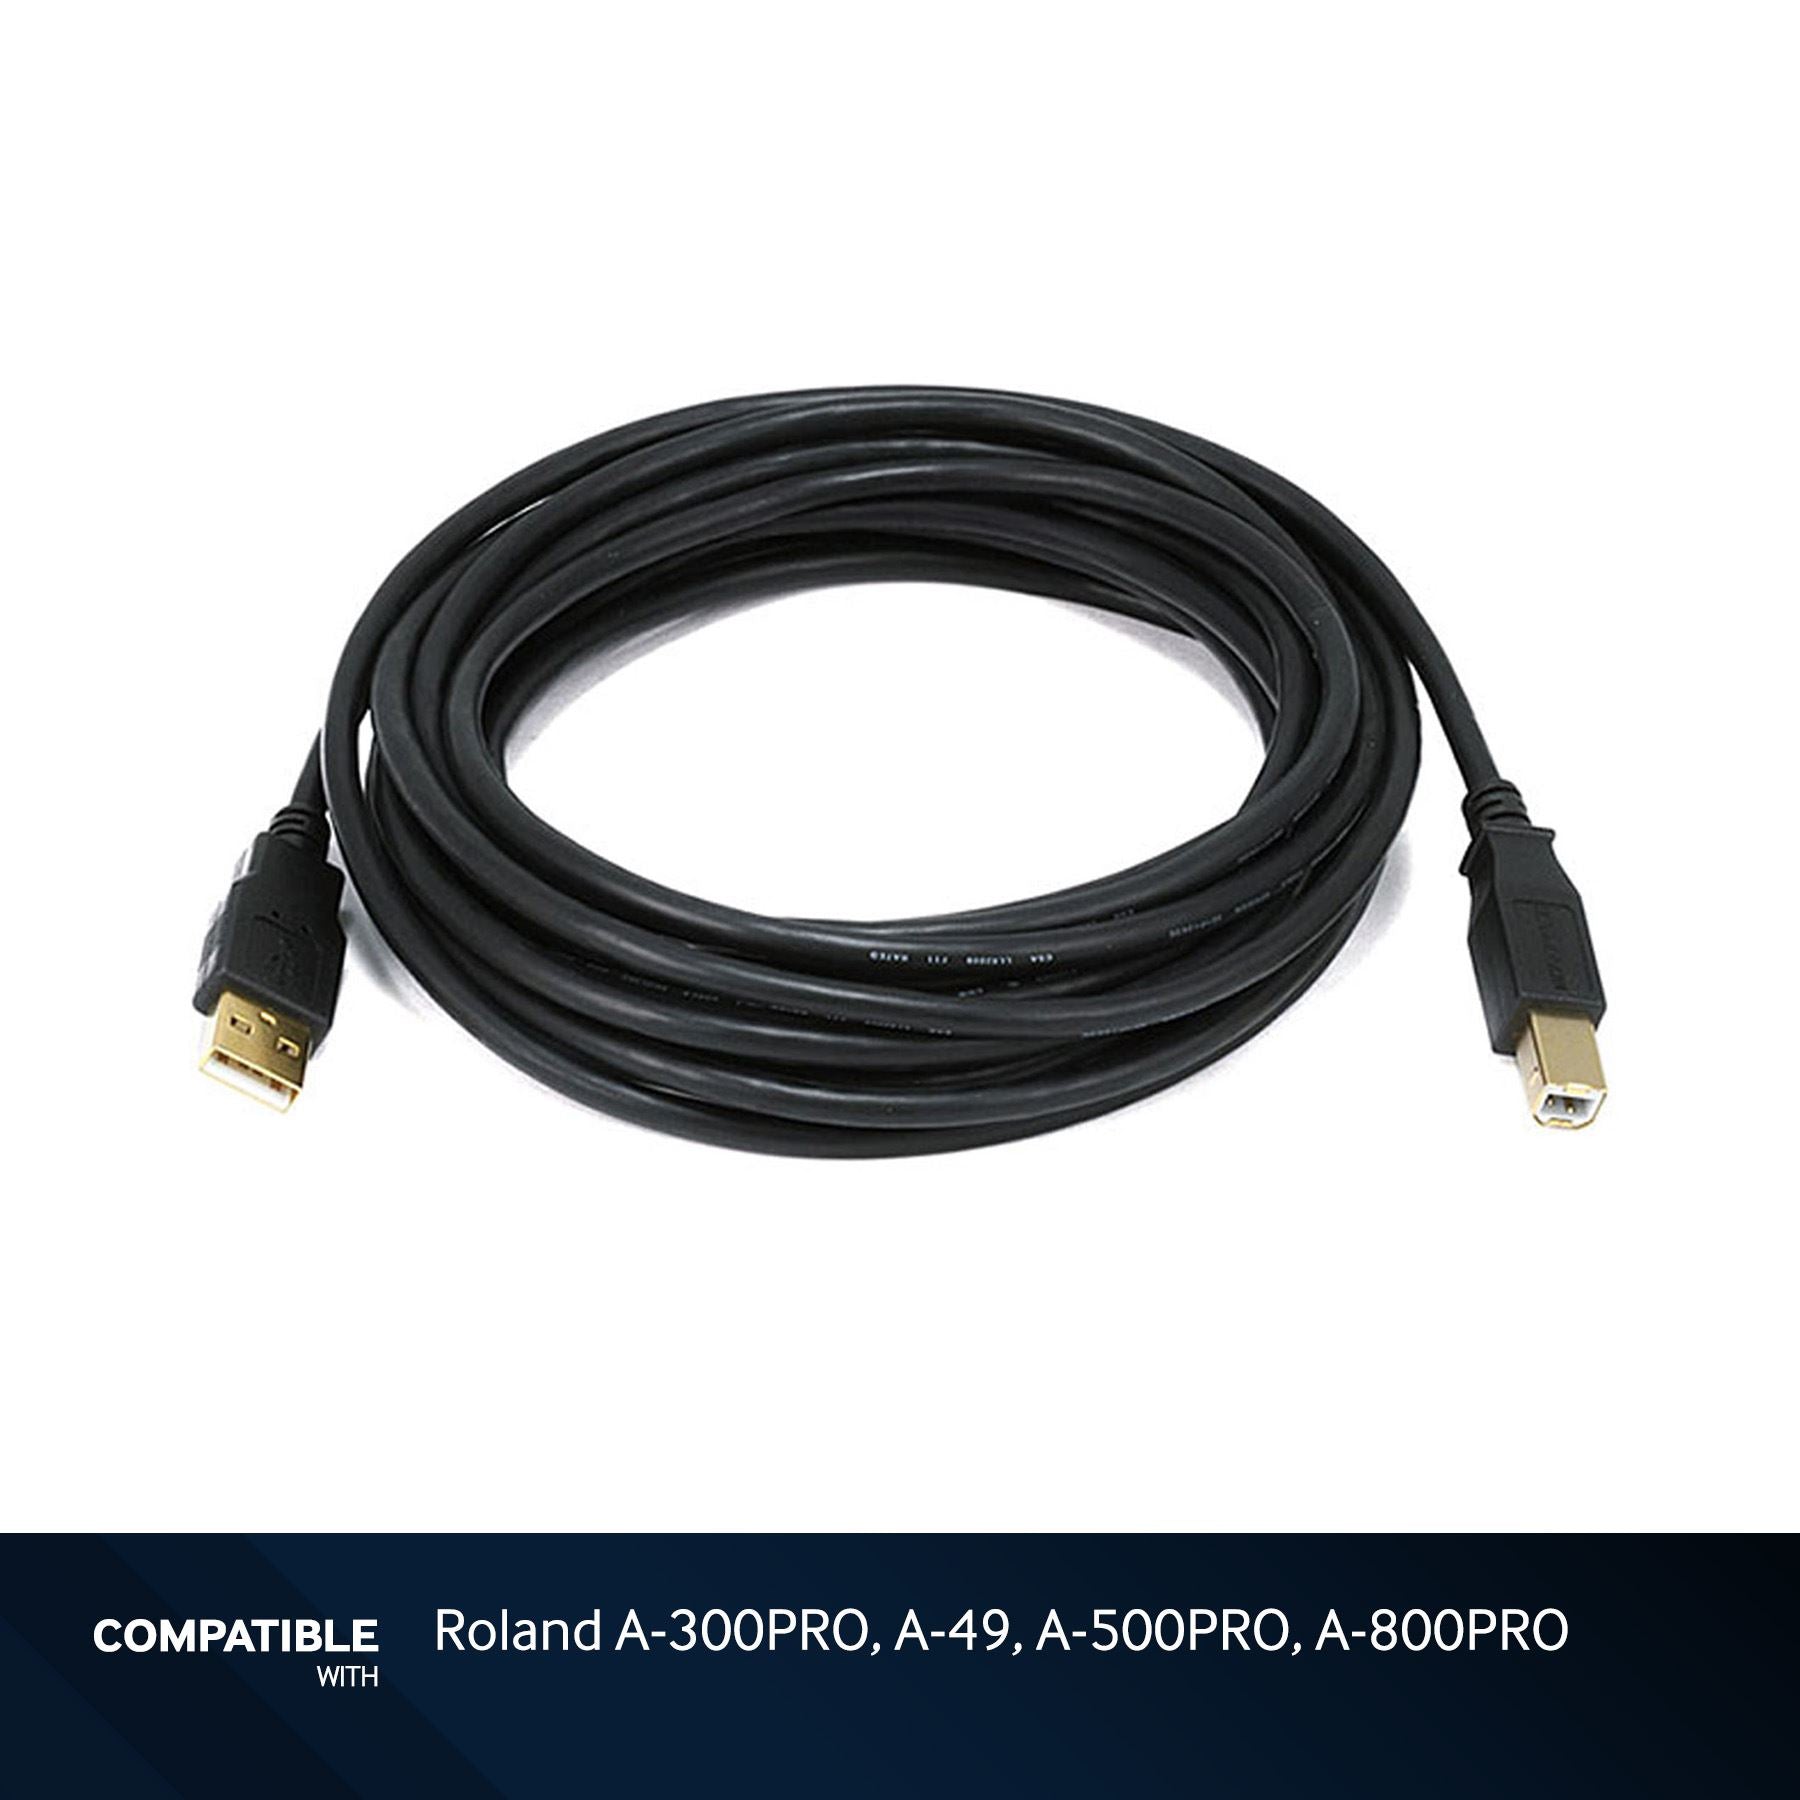 15-foot Black USB-A to USB-B 2.0 Gold Plated Cable for Roland A